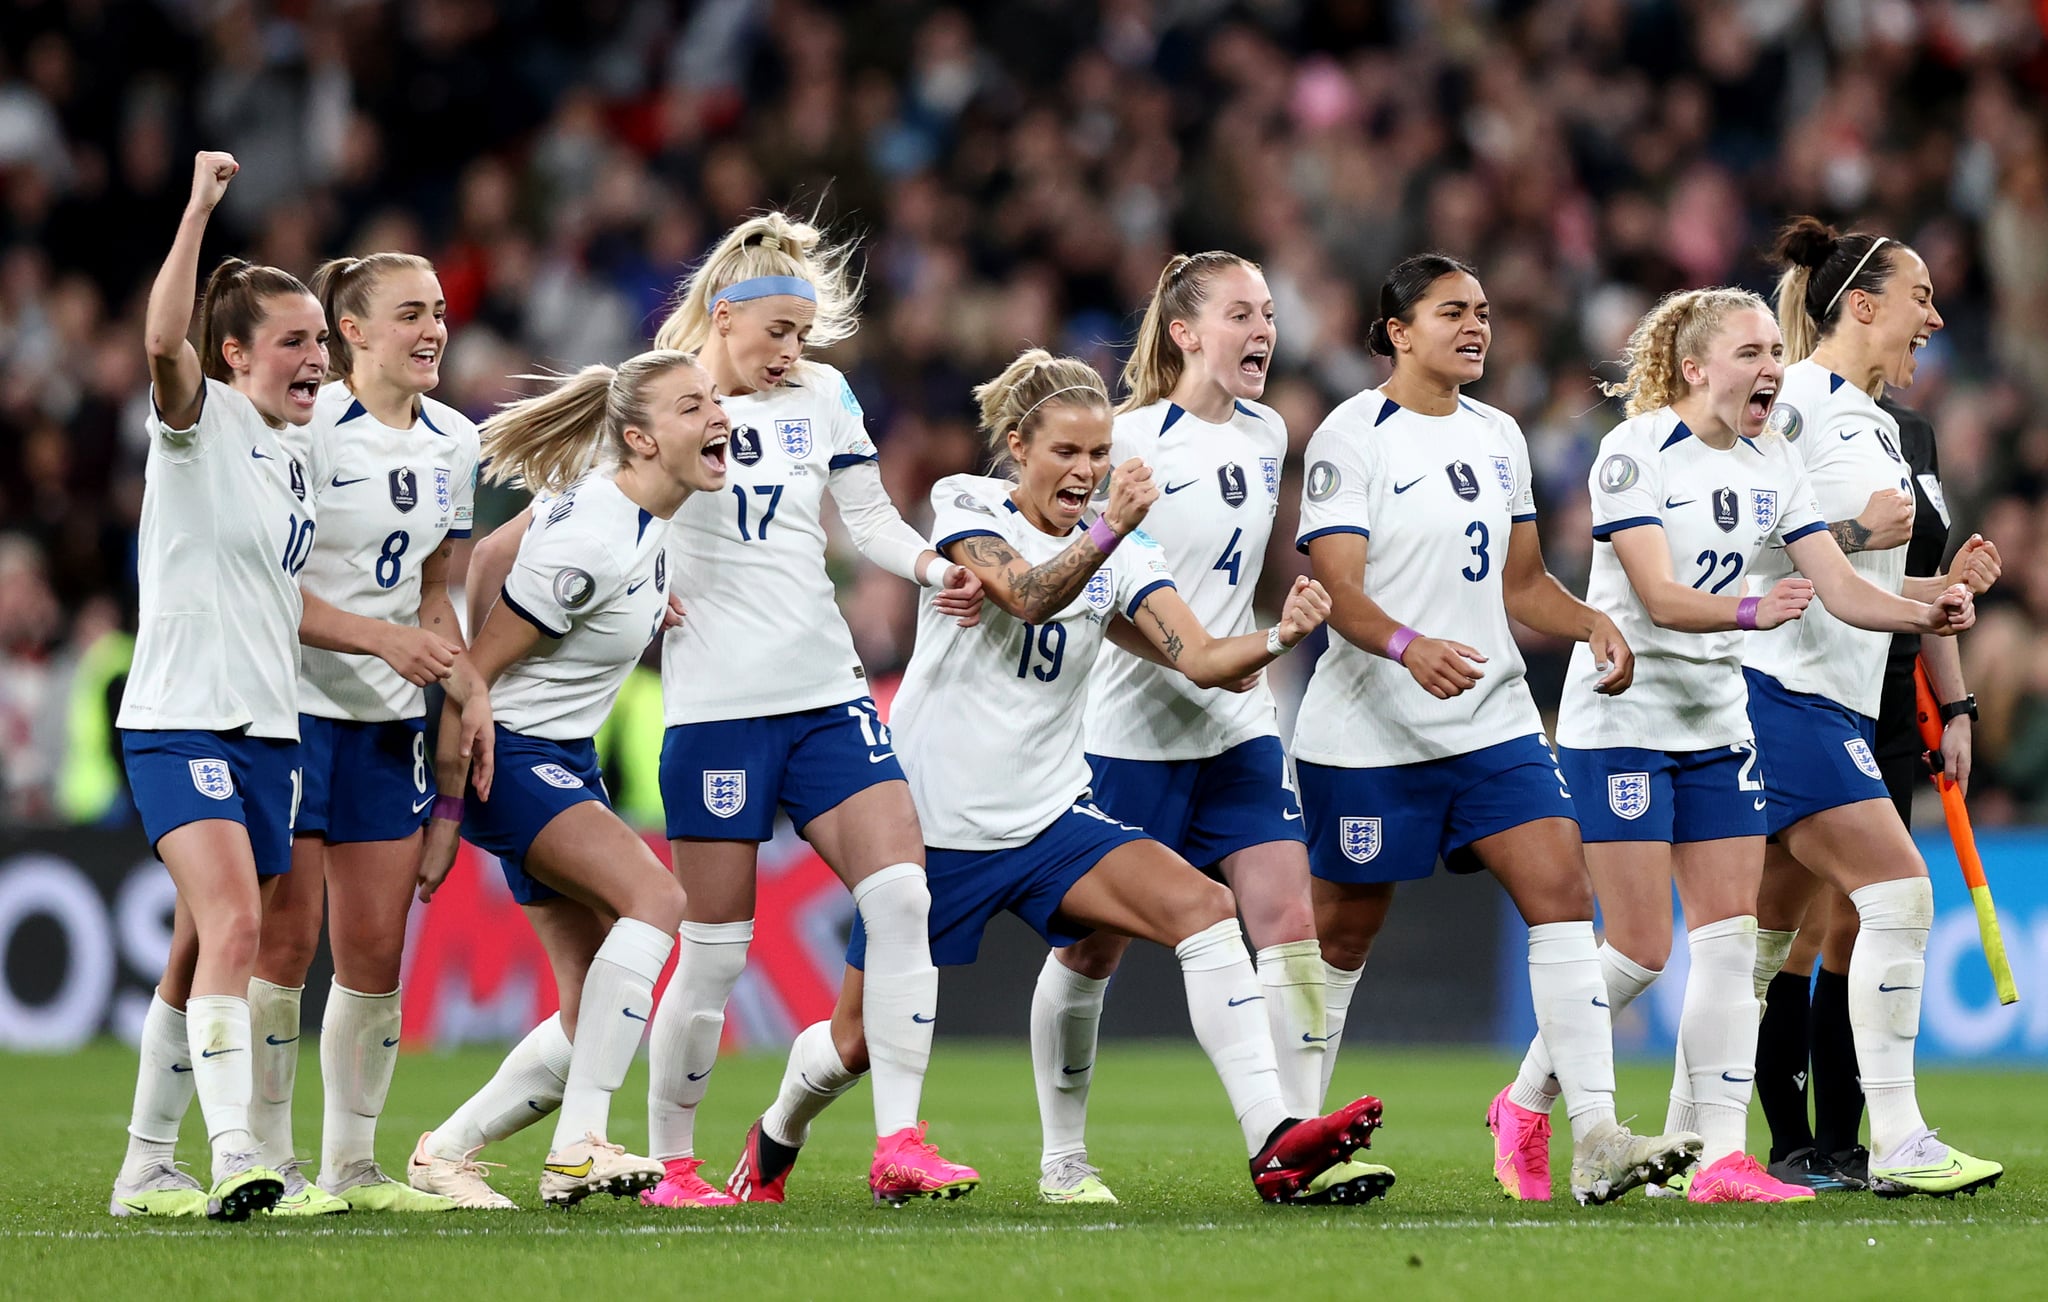 LONDON, ENGLAND - APRIL 06: England celebrate during the penalty shoot out during the Women´s Finalissima match between England and Brazil at Wembley Stadium on April 06, 2023 in London, England. (Photo by Naomi Baker - The FA/The FA via Getty Images)